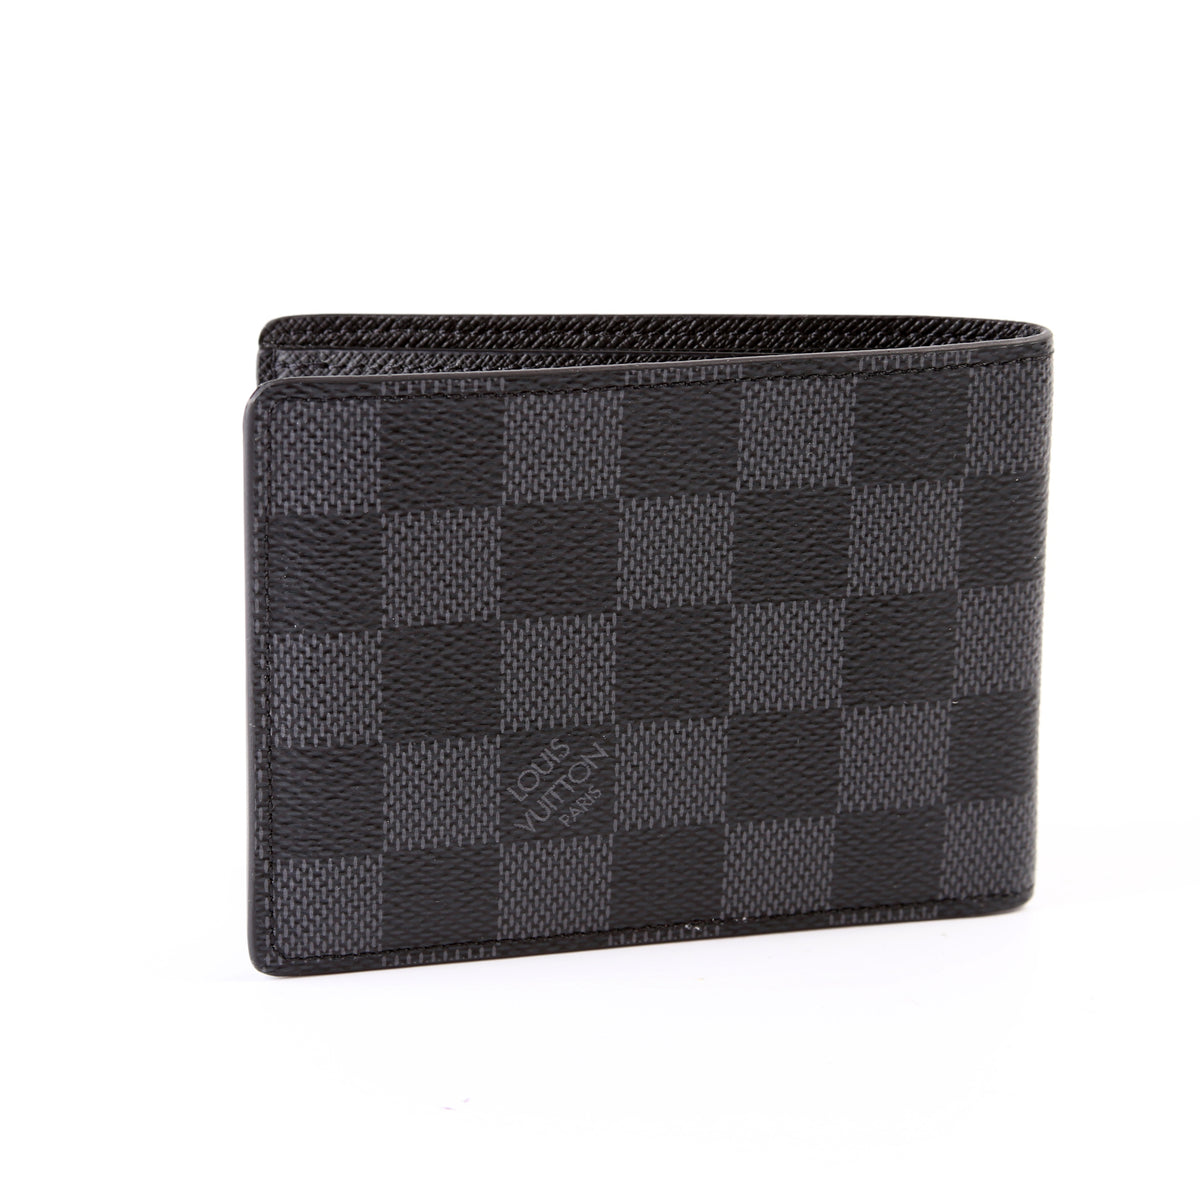 Coin Card Holder Damier Graphite Canvas - Men - Small Leather